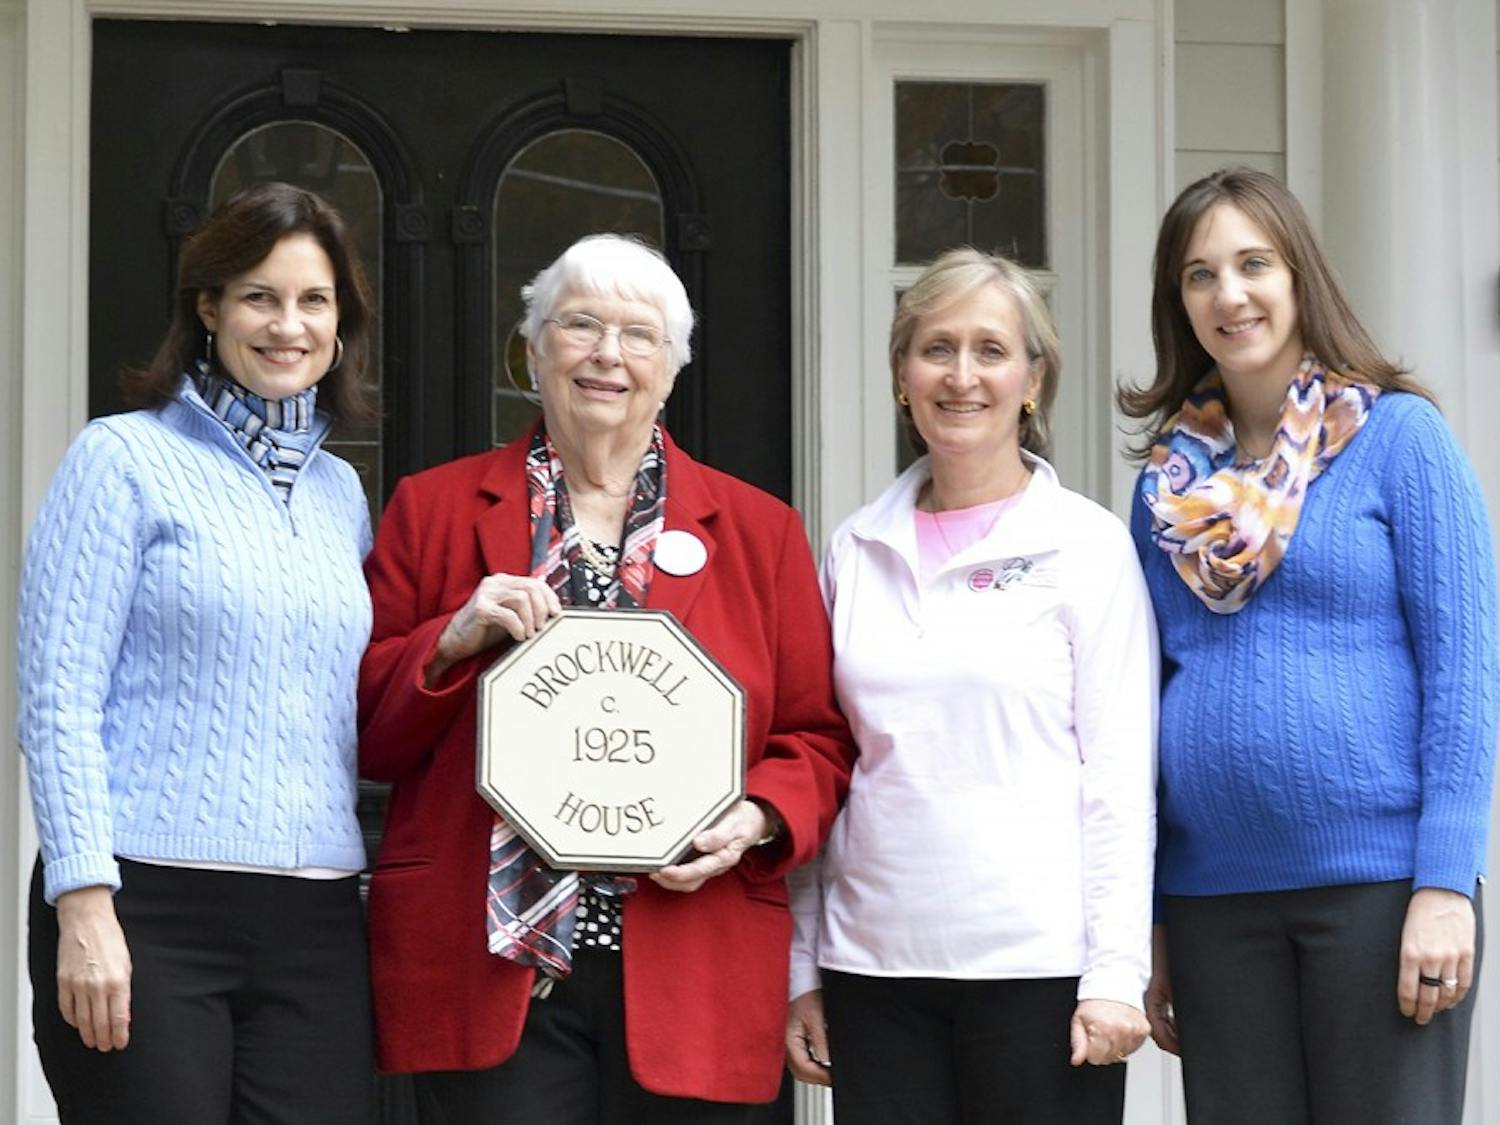 UNCDebra Pickrel, alumna chair and president of Gamma Lambda Chapter Association, Nanette Fields, first house corporation director, Karen Dias, house corporation board member and Cheri Szcodronski, Executive Director of Preservation Chapel Hill pose with the award after the Phi Mu 50th Anniversary brunch Sunday.Debra Pickrel, alumna chair and president of Gamma Lambda Chapter Association, Nanette Fields, first house corporation director, Karen Dias, house corporation board member and Cheri Szcodronski, Executive Director of Preservation Chapel Hill pose with the Brockwell plaque award for preservation after the Phi Mu 50th Anniversary brunch Sunday.